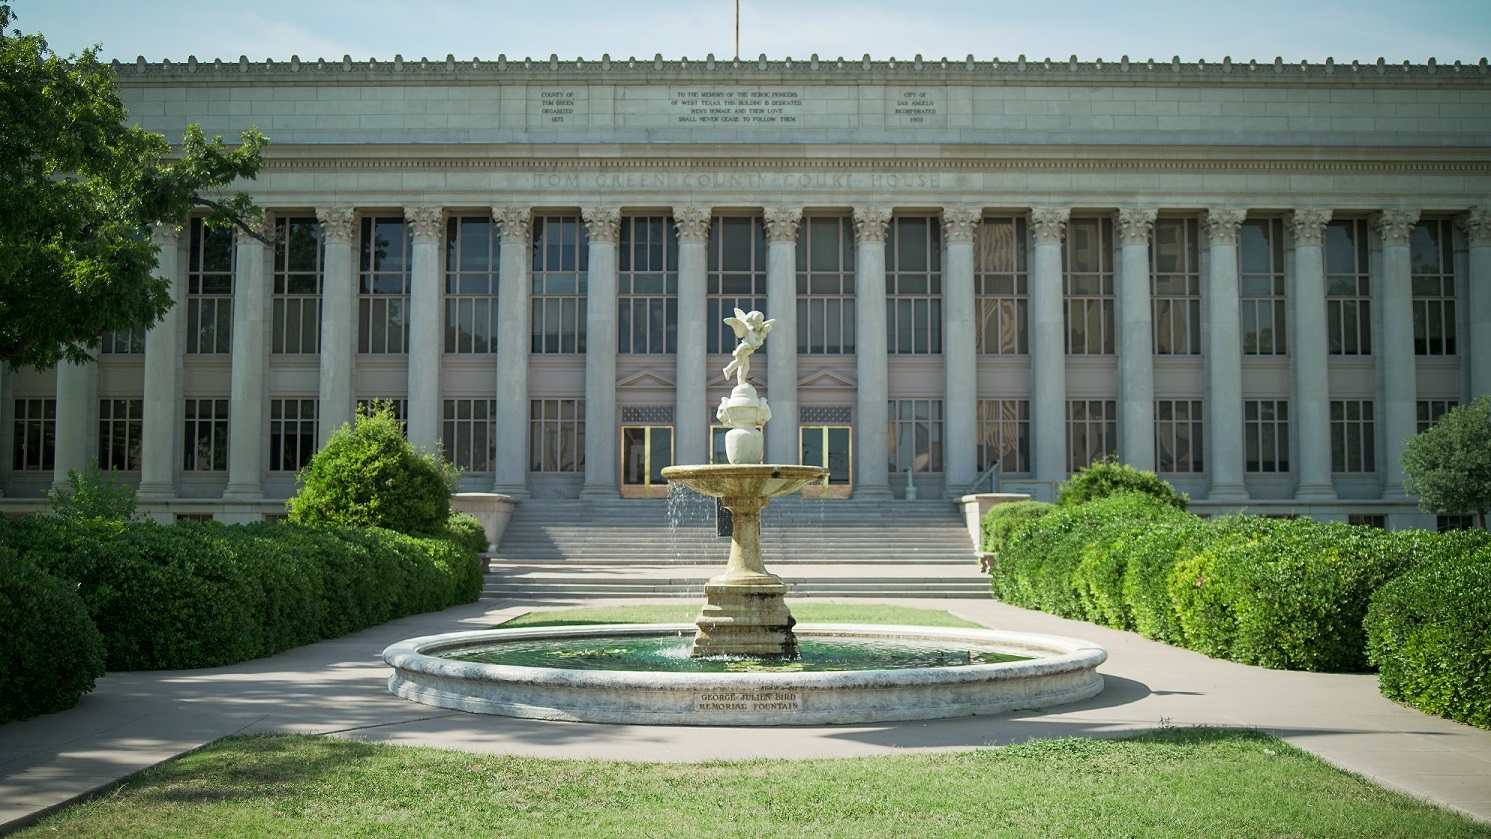 Tom Green County Courthouse with Corinthian columns and fountain